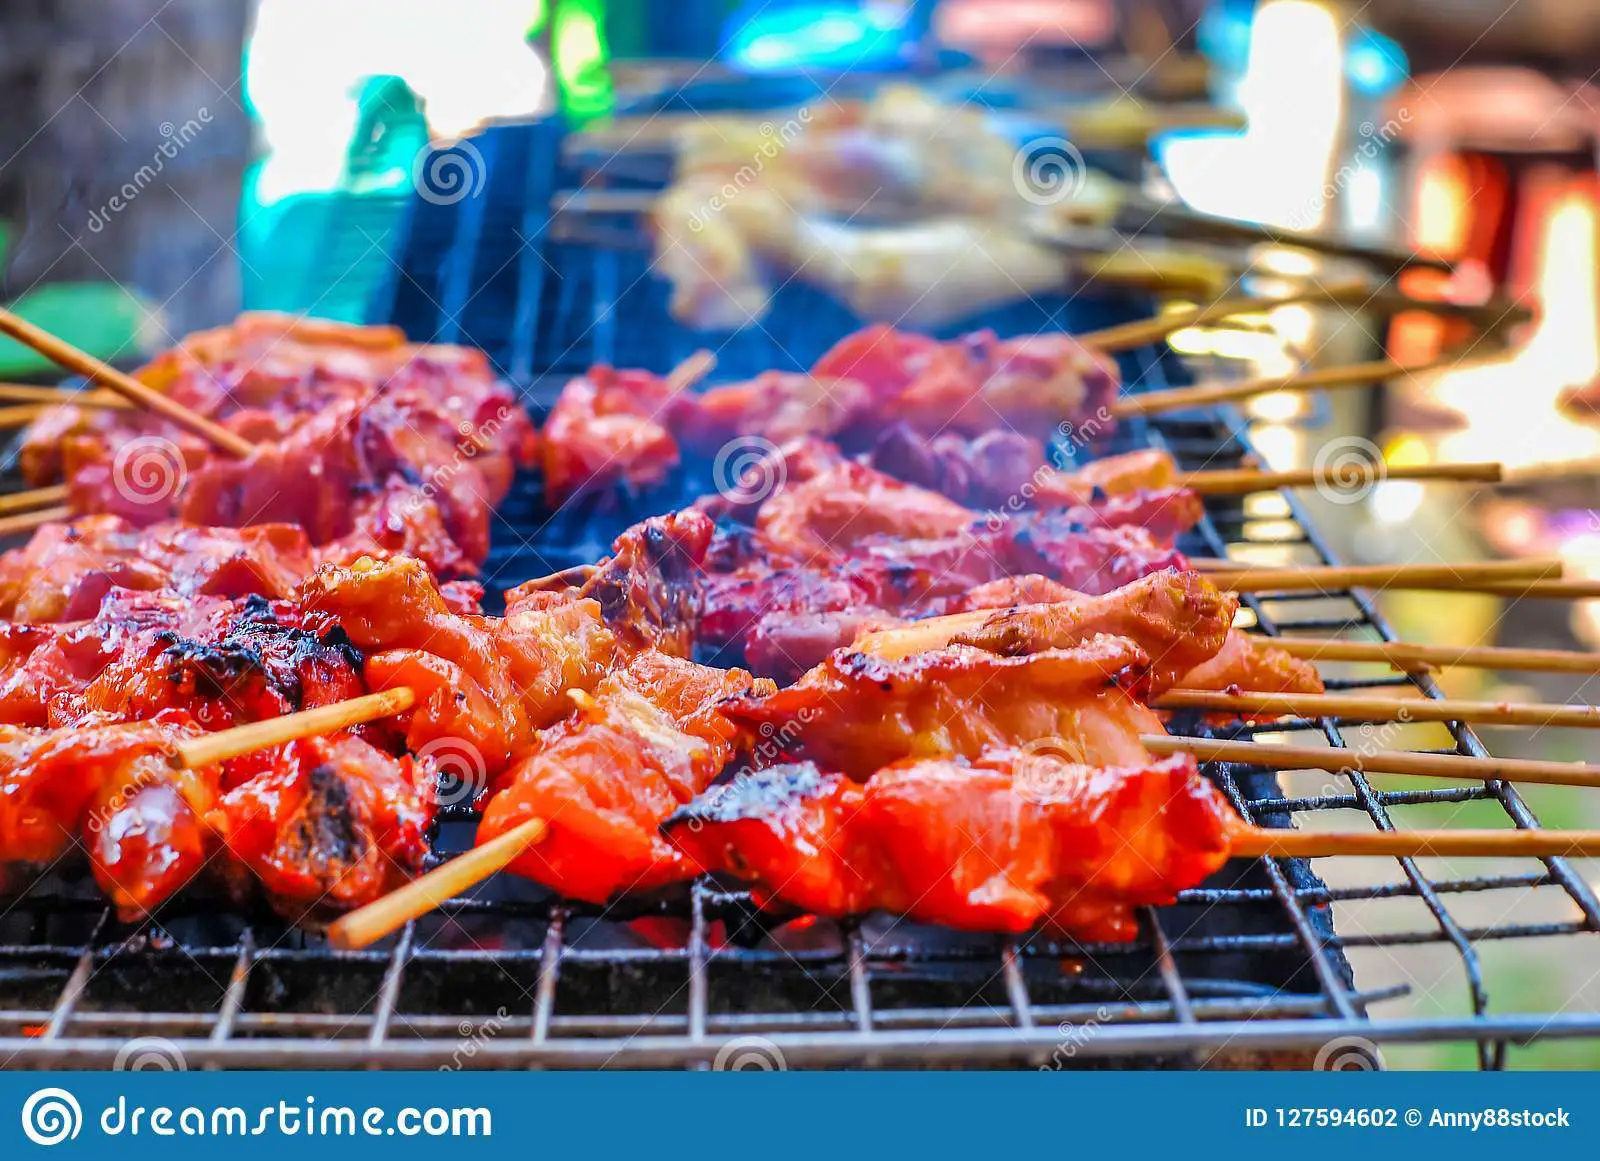 Grilled Chicken On Charcoal Grill Stock Photo